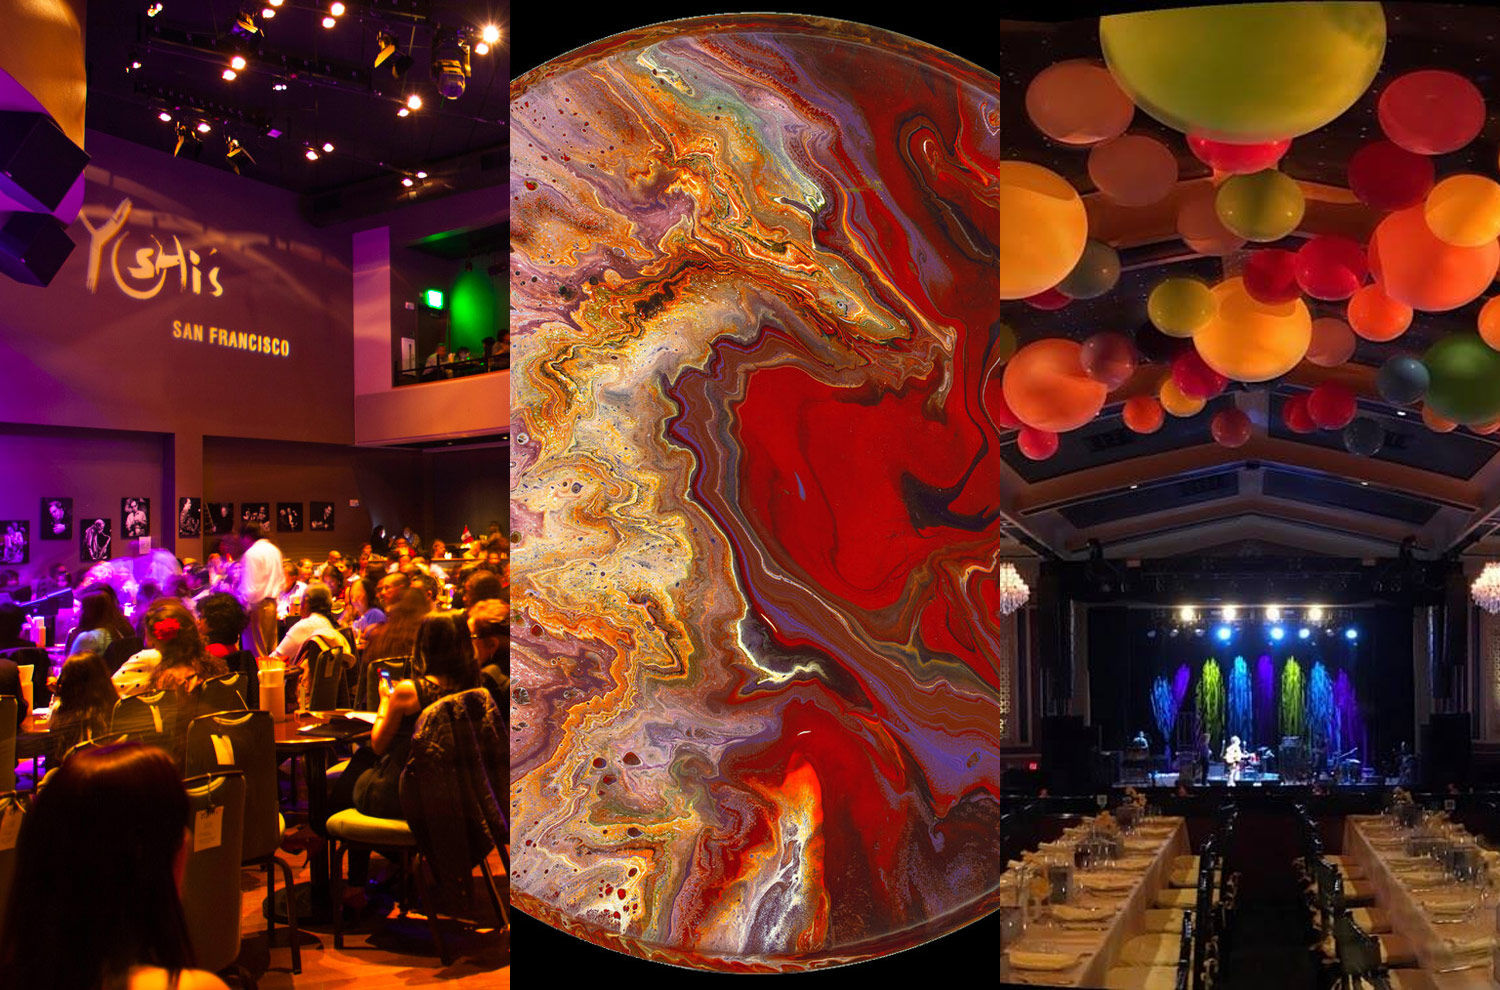 Collage showing Yoshi's, Mickey Hart's art, and the UC Theatre